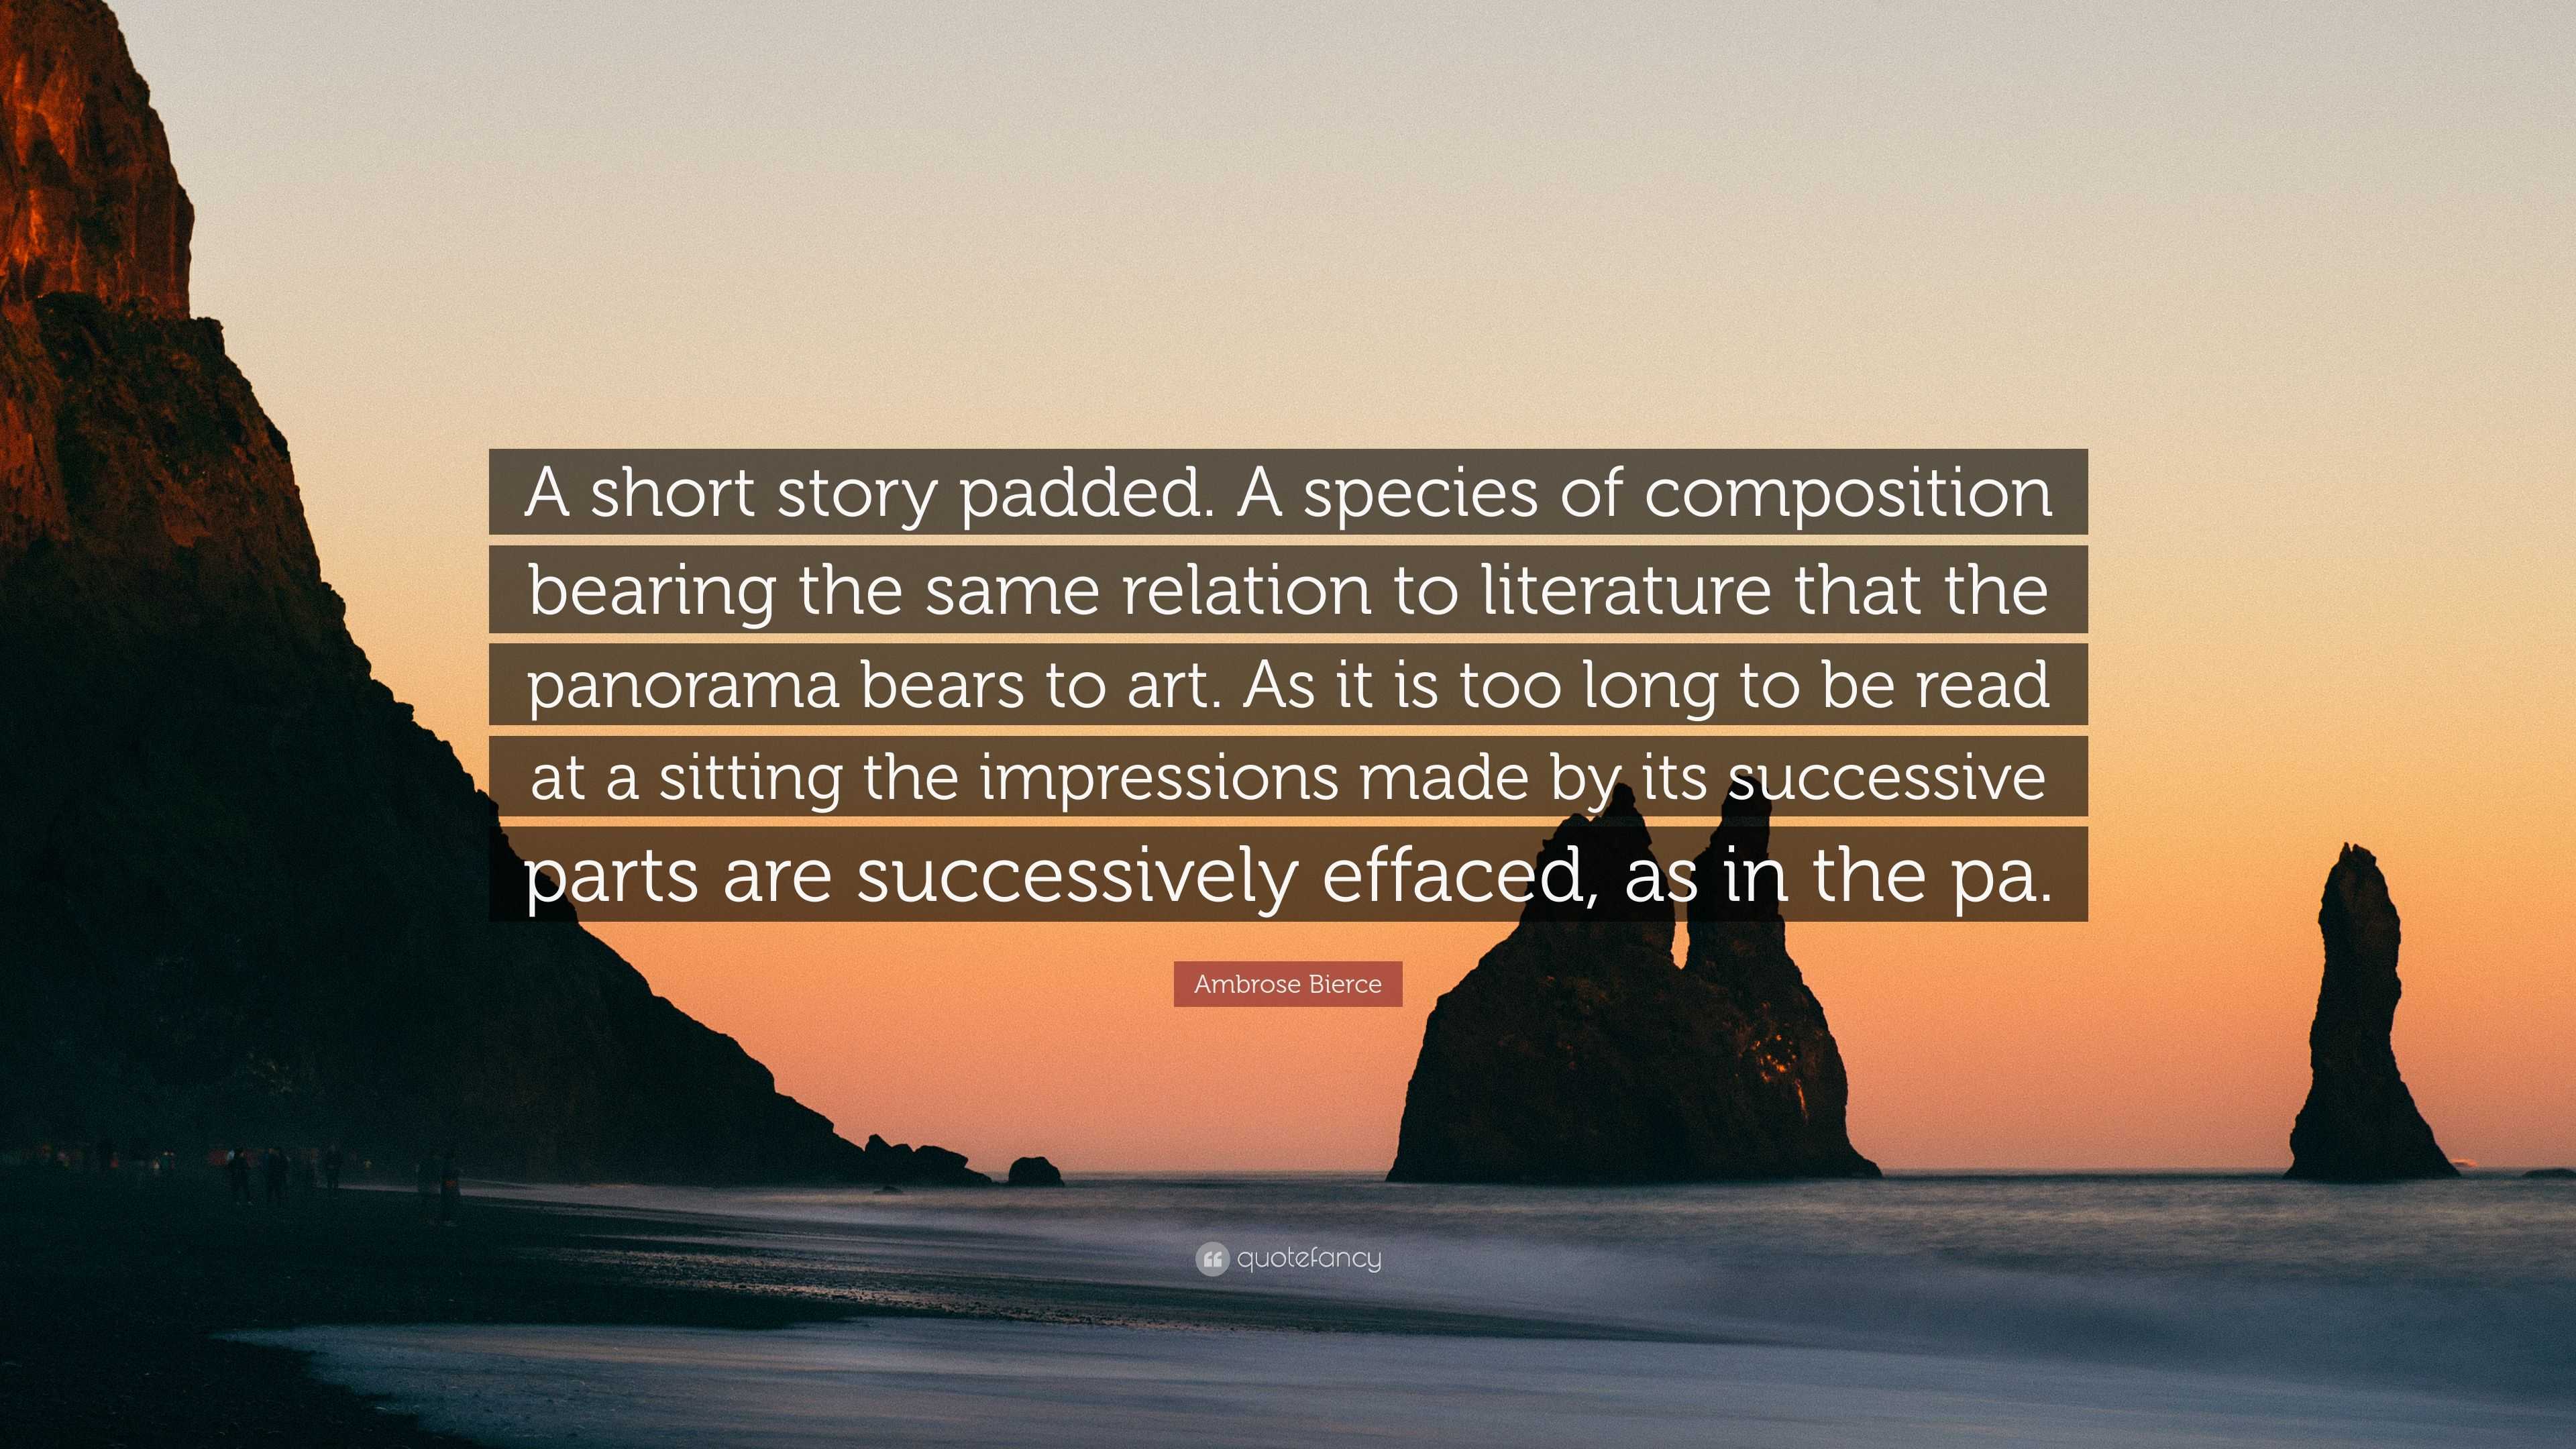 https://quotefancy.com/media/wallpaper/3840x2160/3675695-Ambrose-Bierce-Quote-A-short-story-padded-A-species-of-composition.jpg